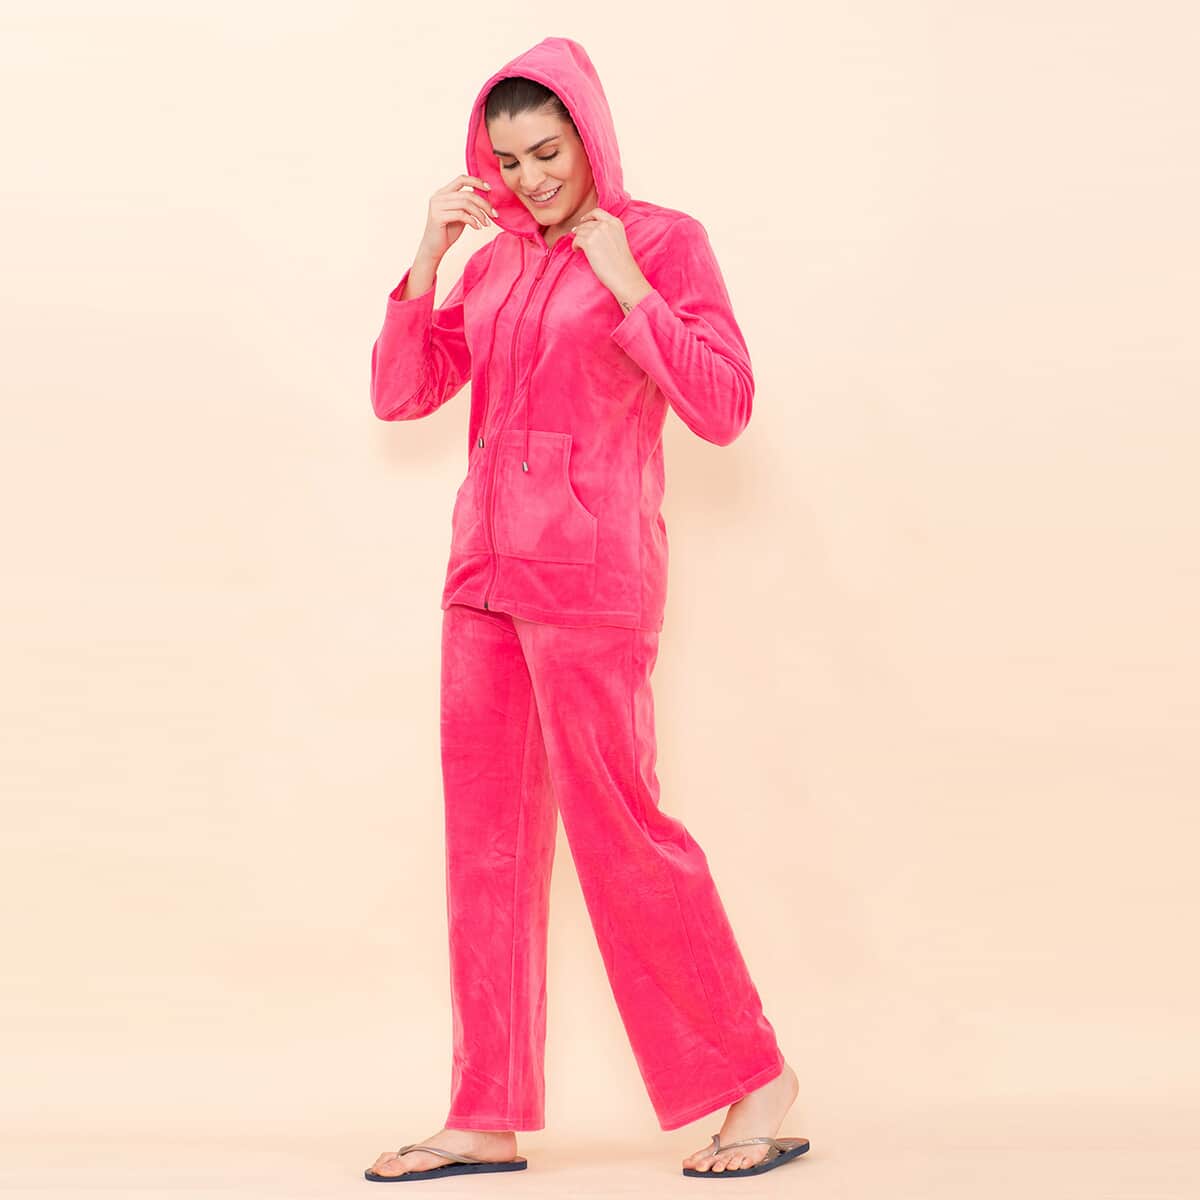 Tamsy LUX Pink Velour Track Suit Set - 3X image number 4